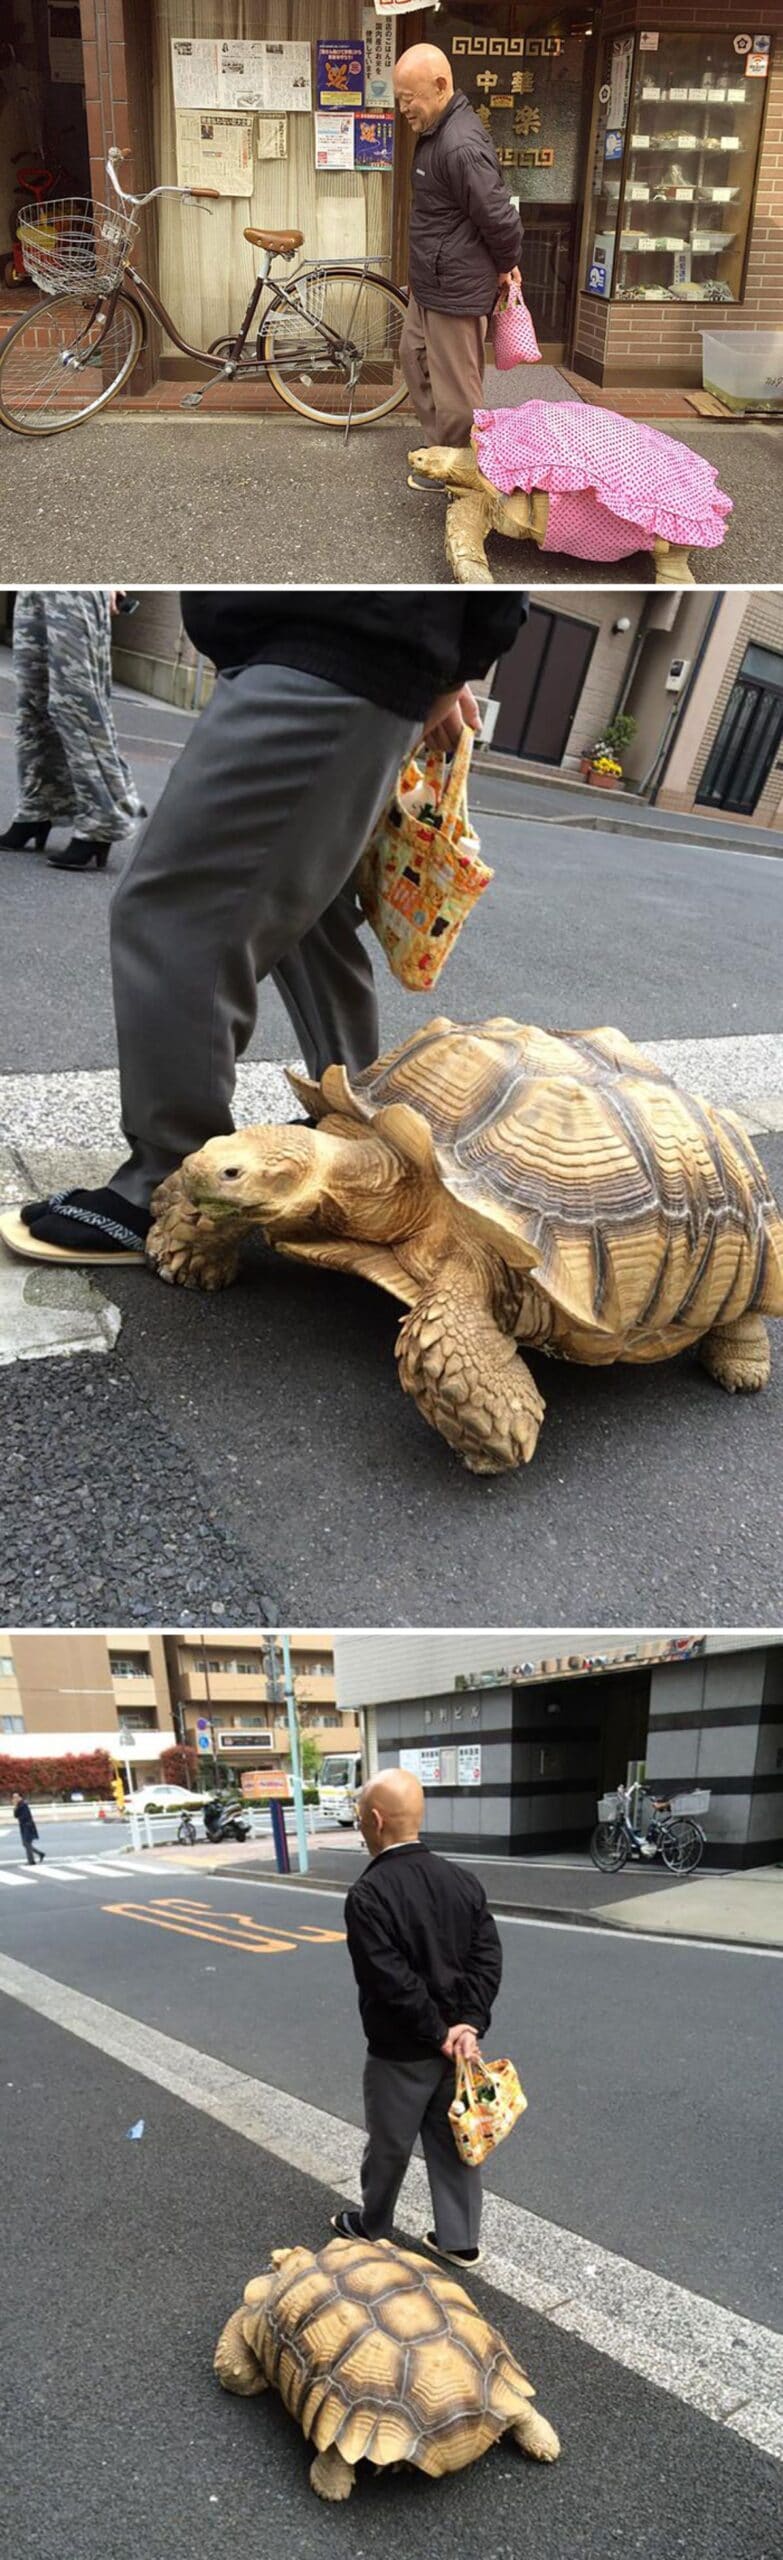 3 photos of a man walking with a large tortoise on a road